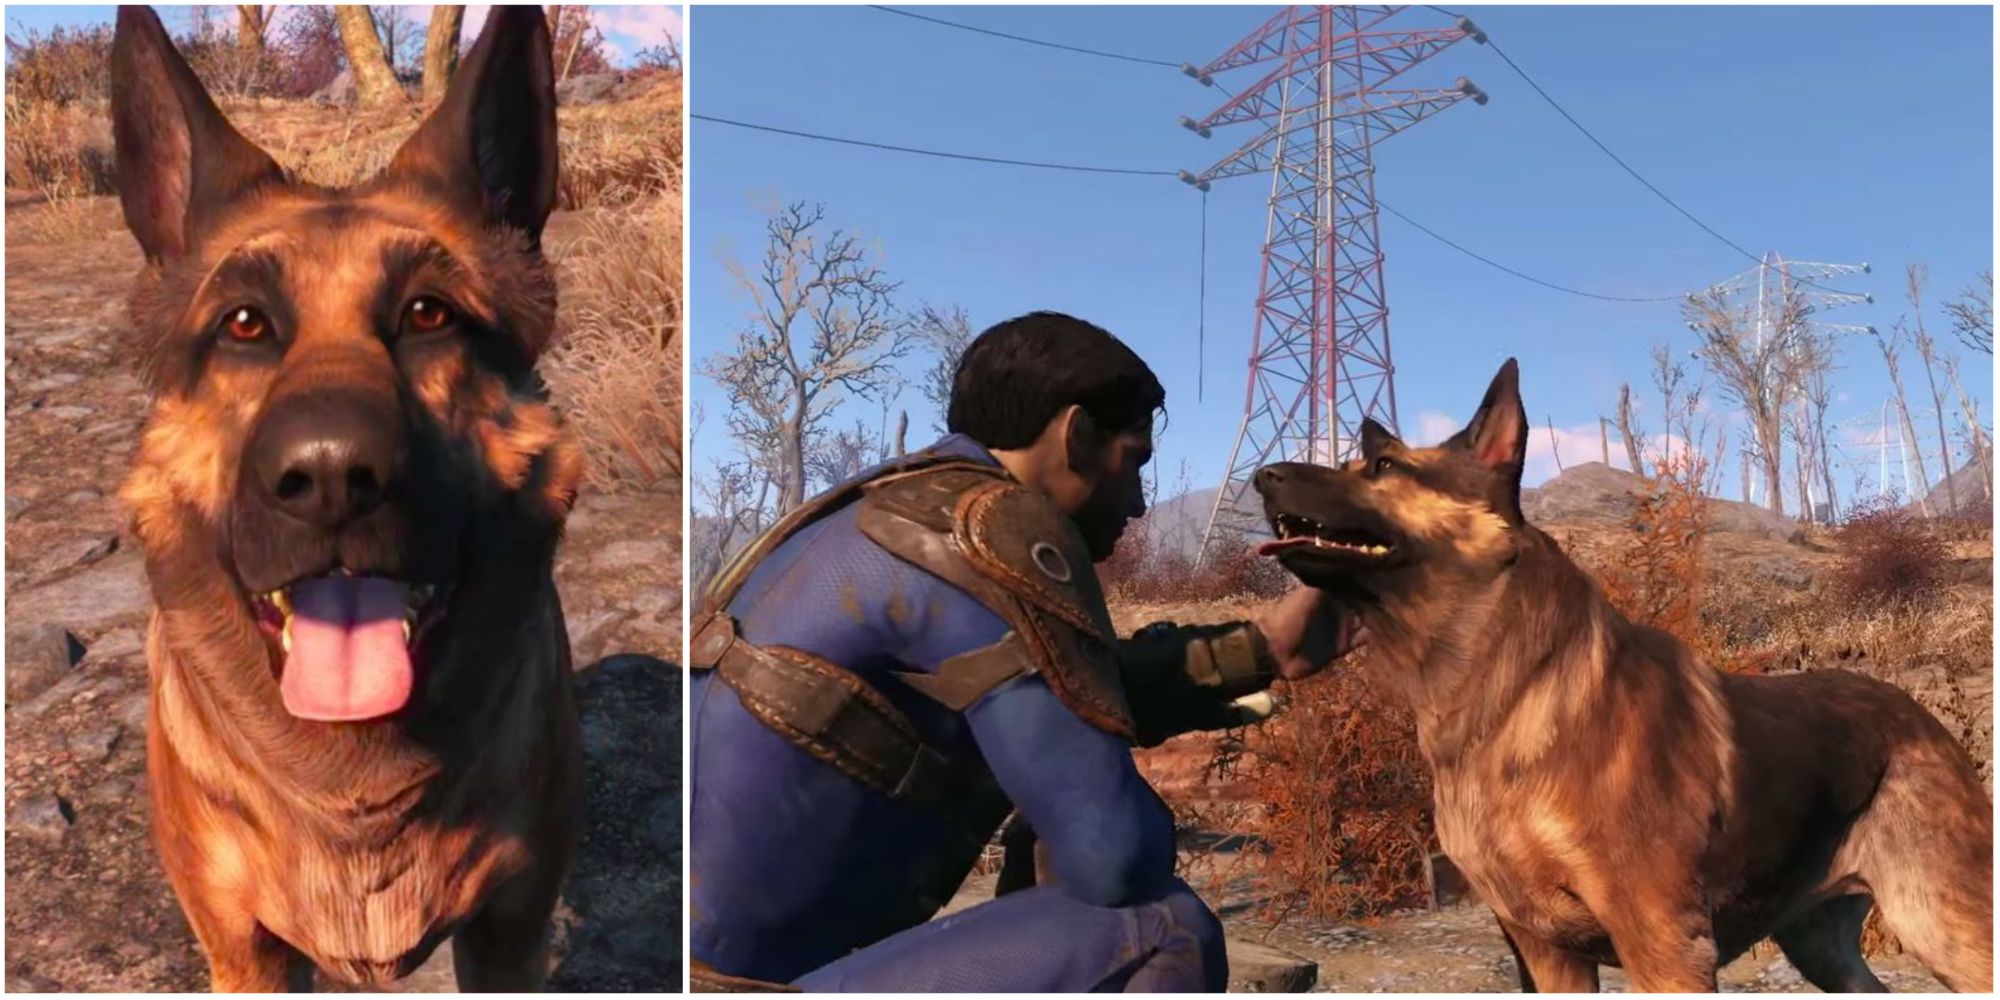 Main character petting Dogmeat in Fallout 4